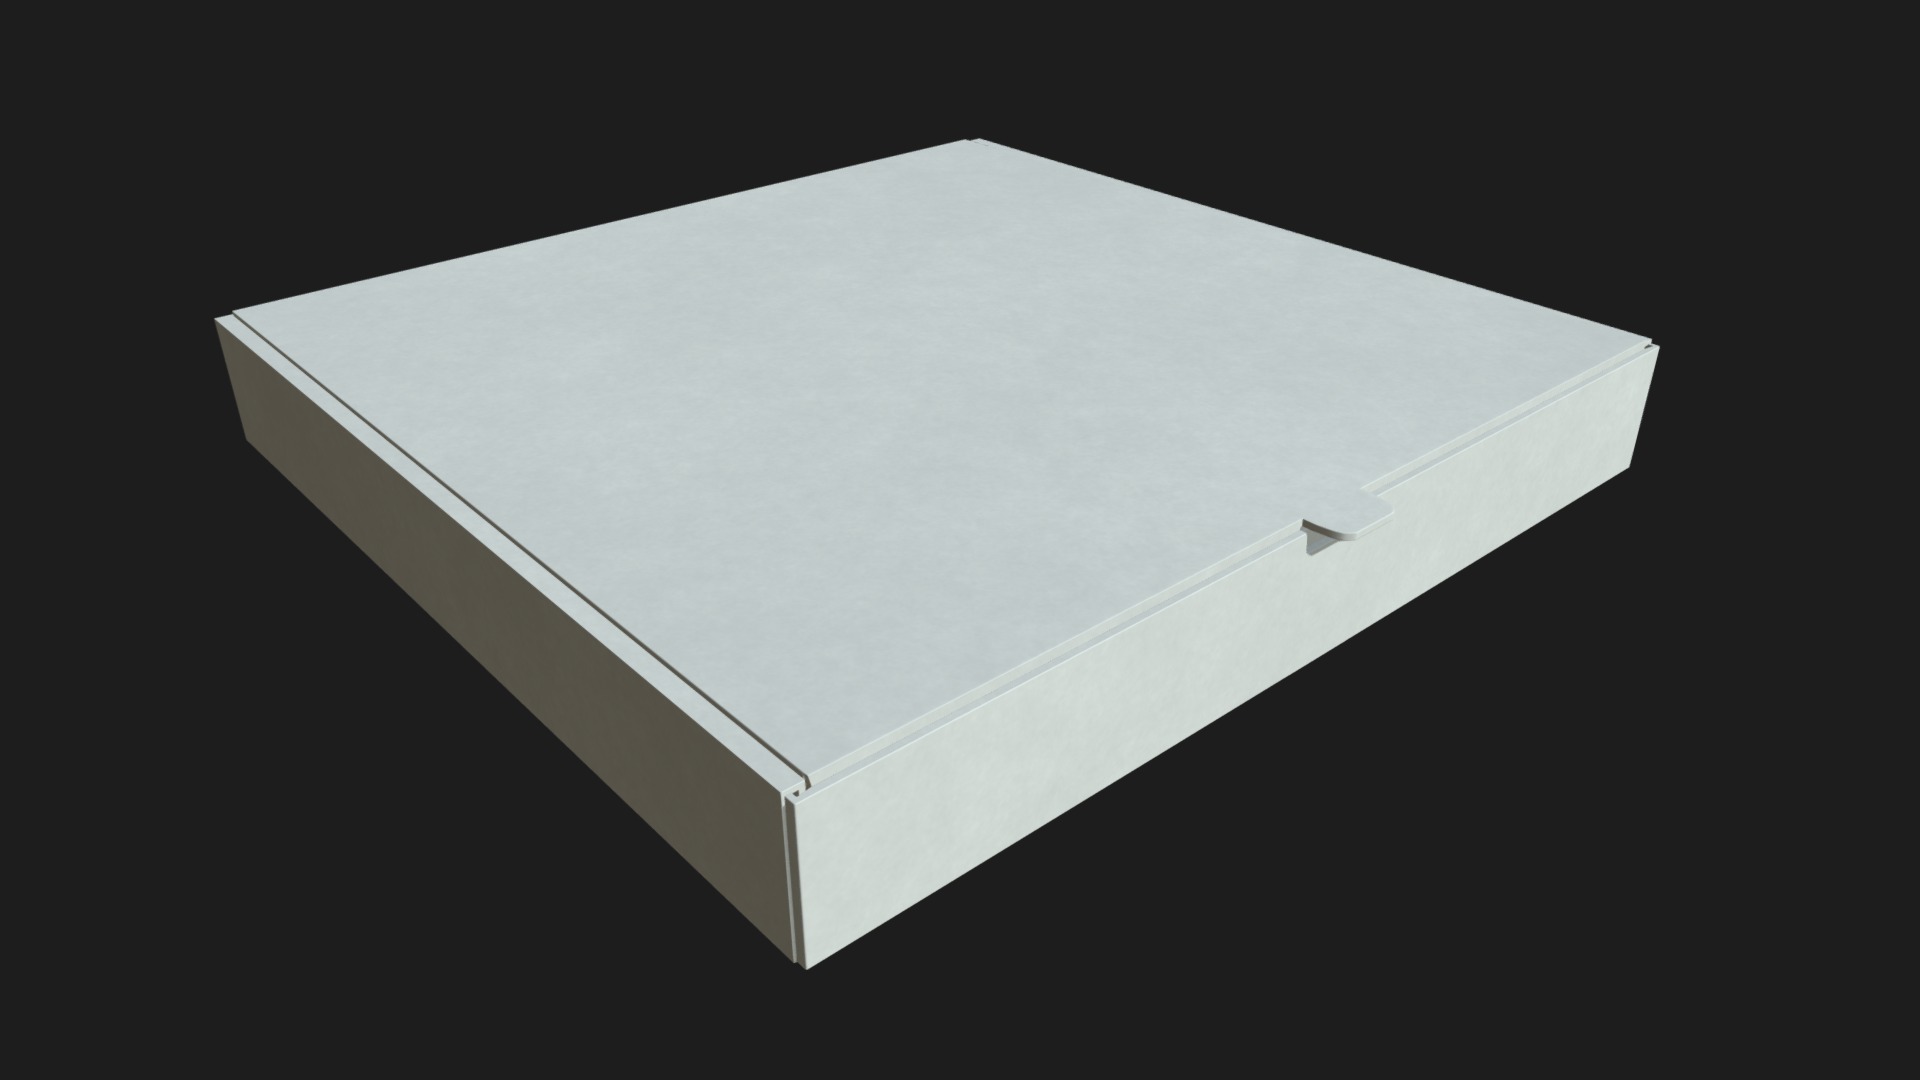 3D model Closed pizza box - This is a 3D model of the Closed pizza box. The 3D model is about a white square with a black background.